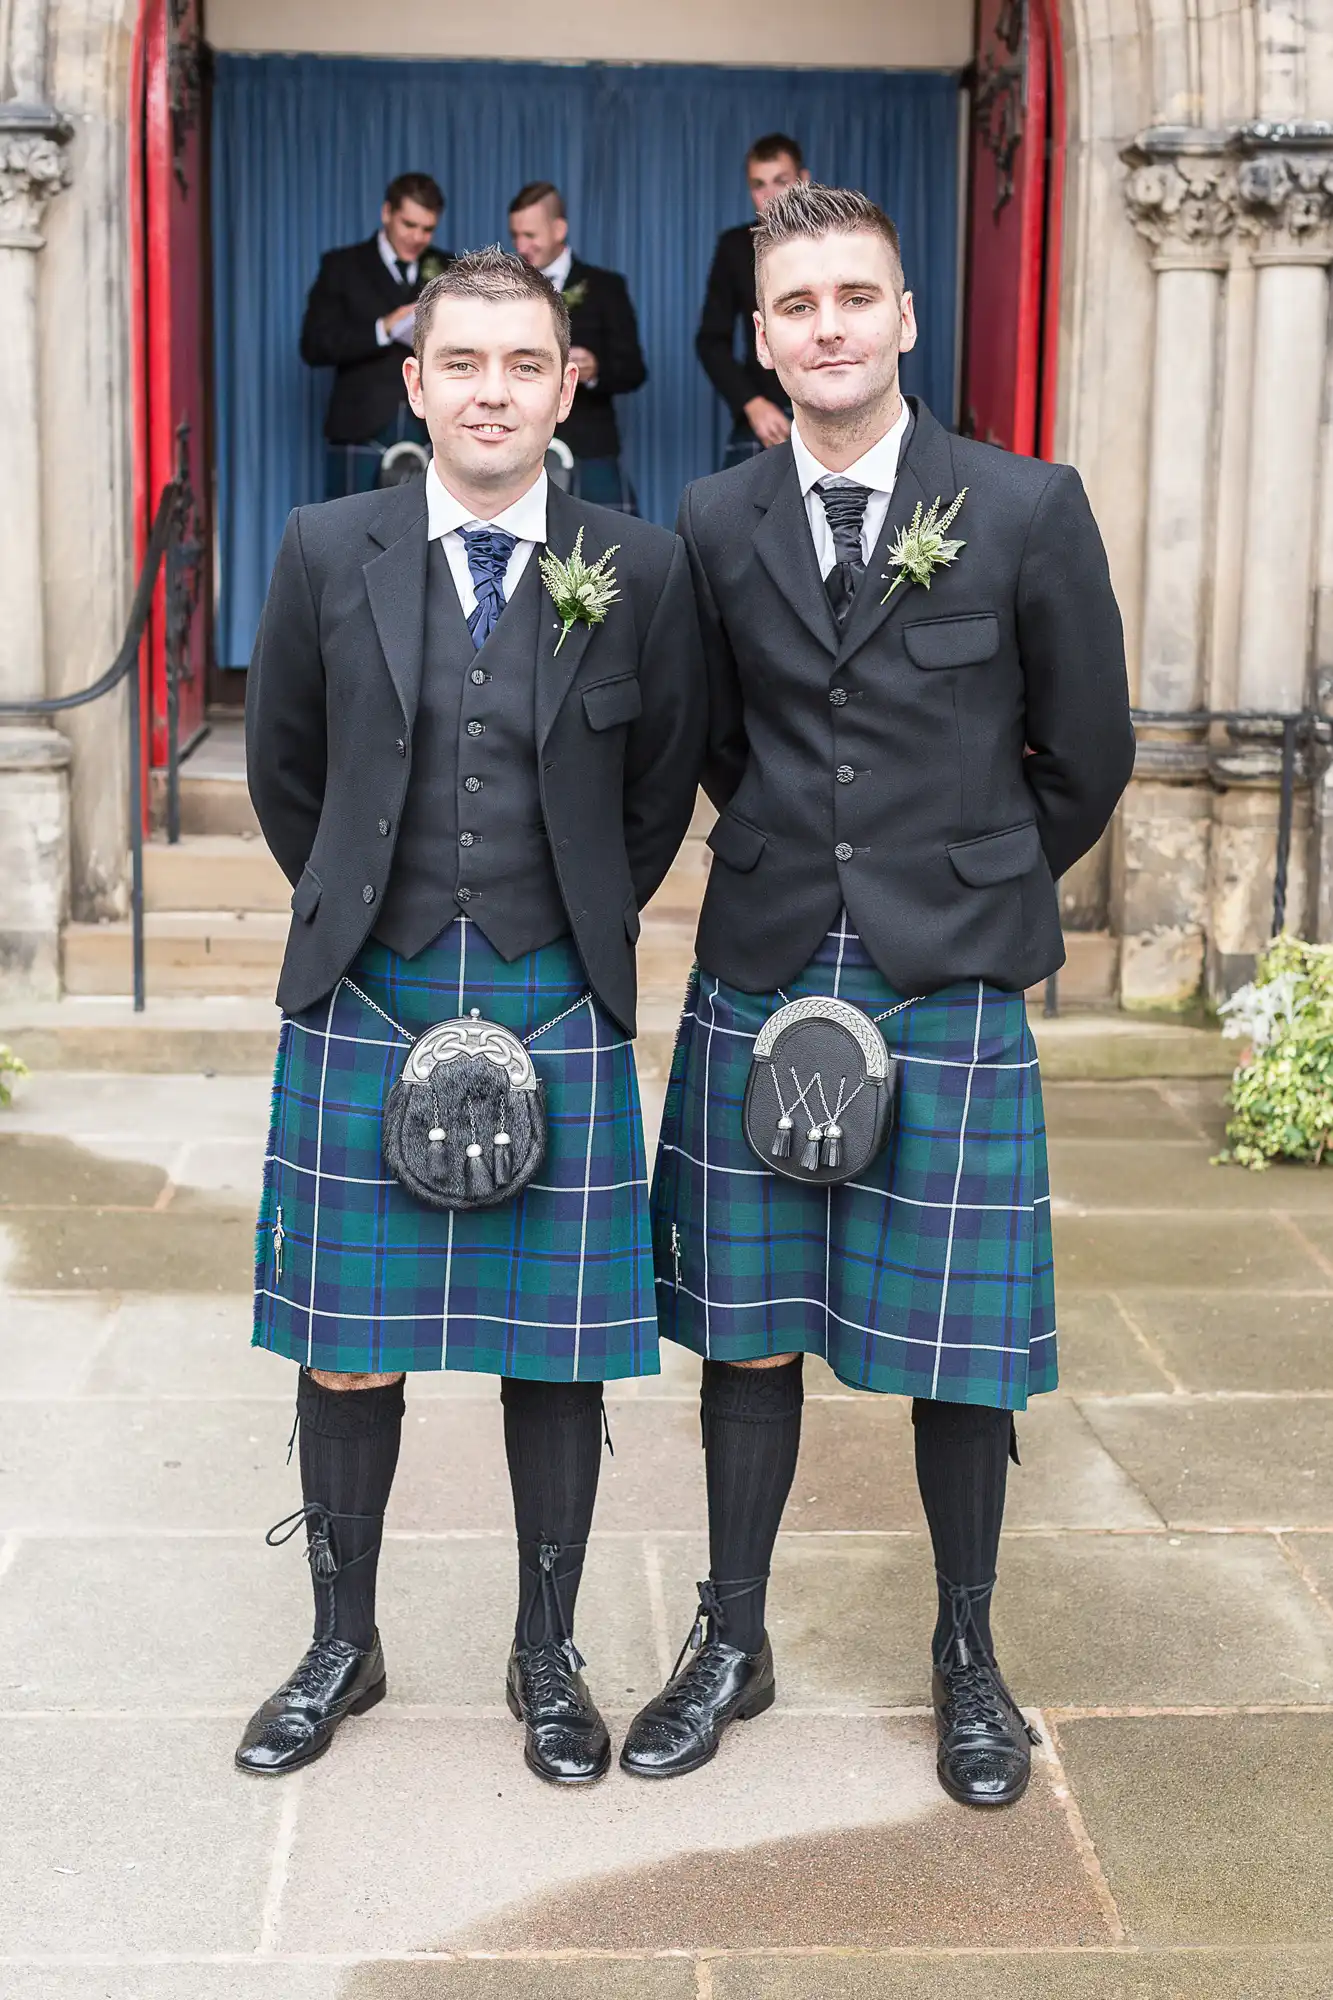 Two men in traditional scottish kilts and jackets, smiling and standing outside a building entrance.